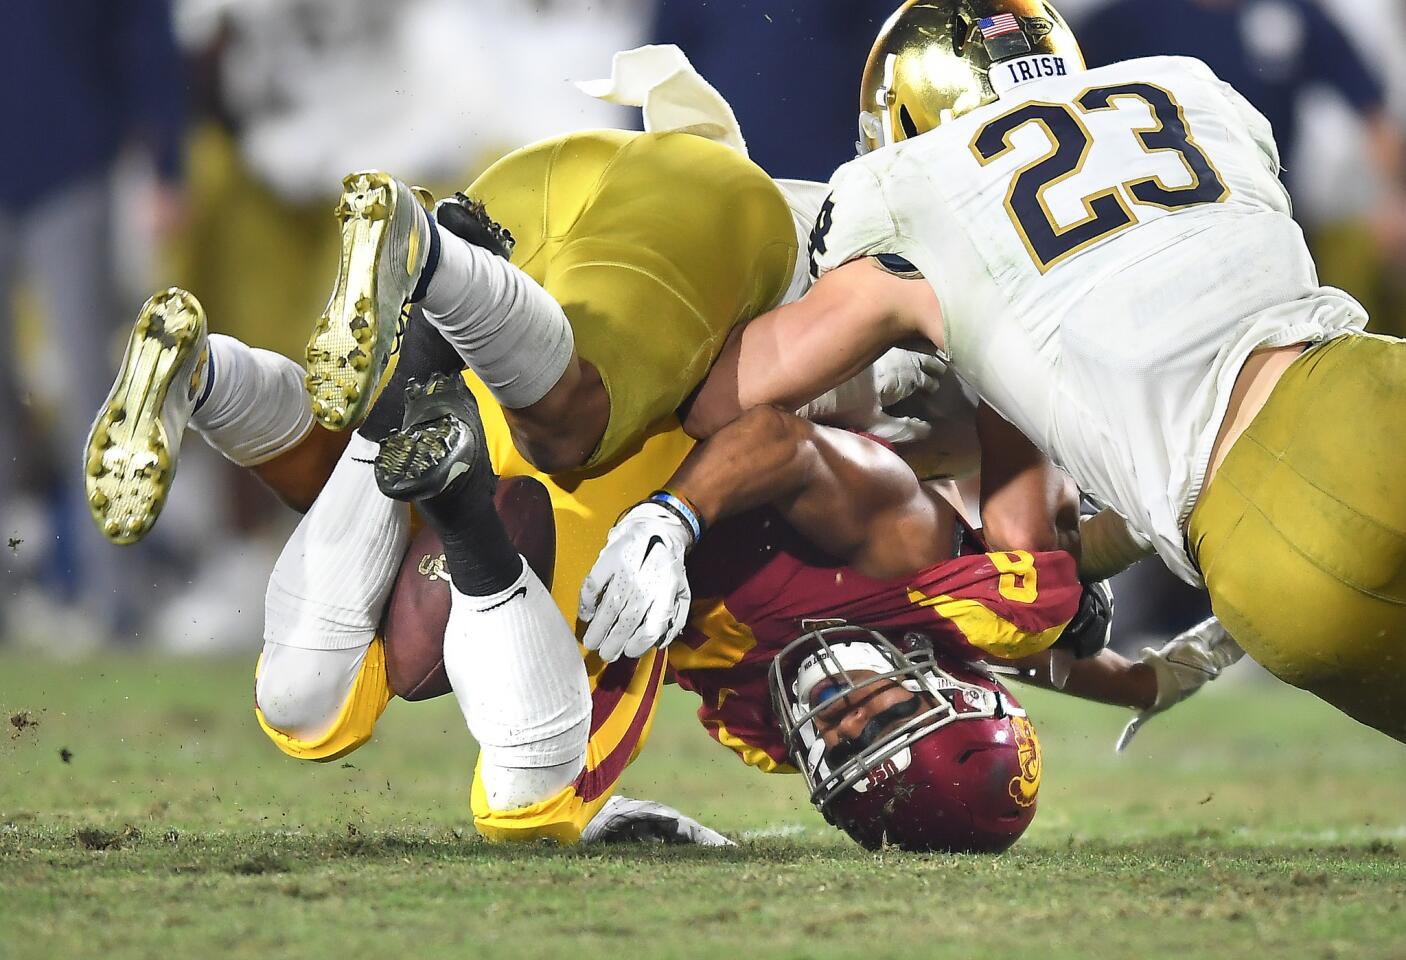 USC receiver Amon-Ra St. Brown fumbles after a reception as Notre Dame's Alohi Gilman makes the tackle and Drue Tranquill helps in the fourth quarter at the Coliseum. Notre Dame recovered the ball.